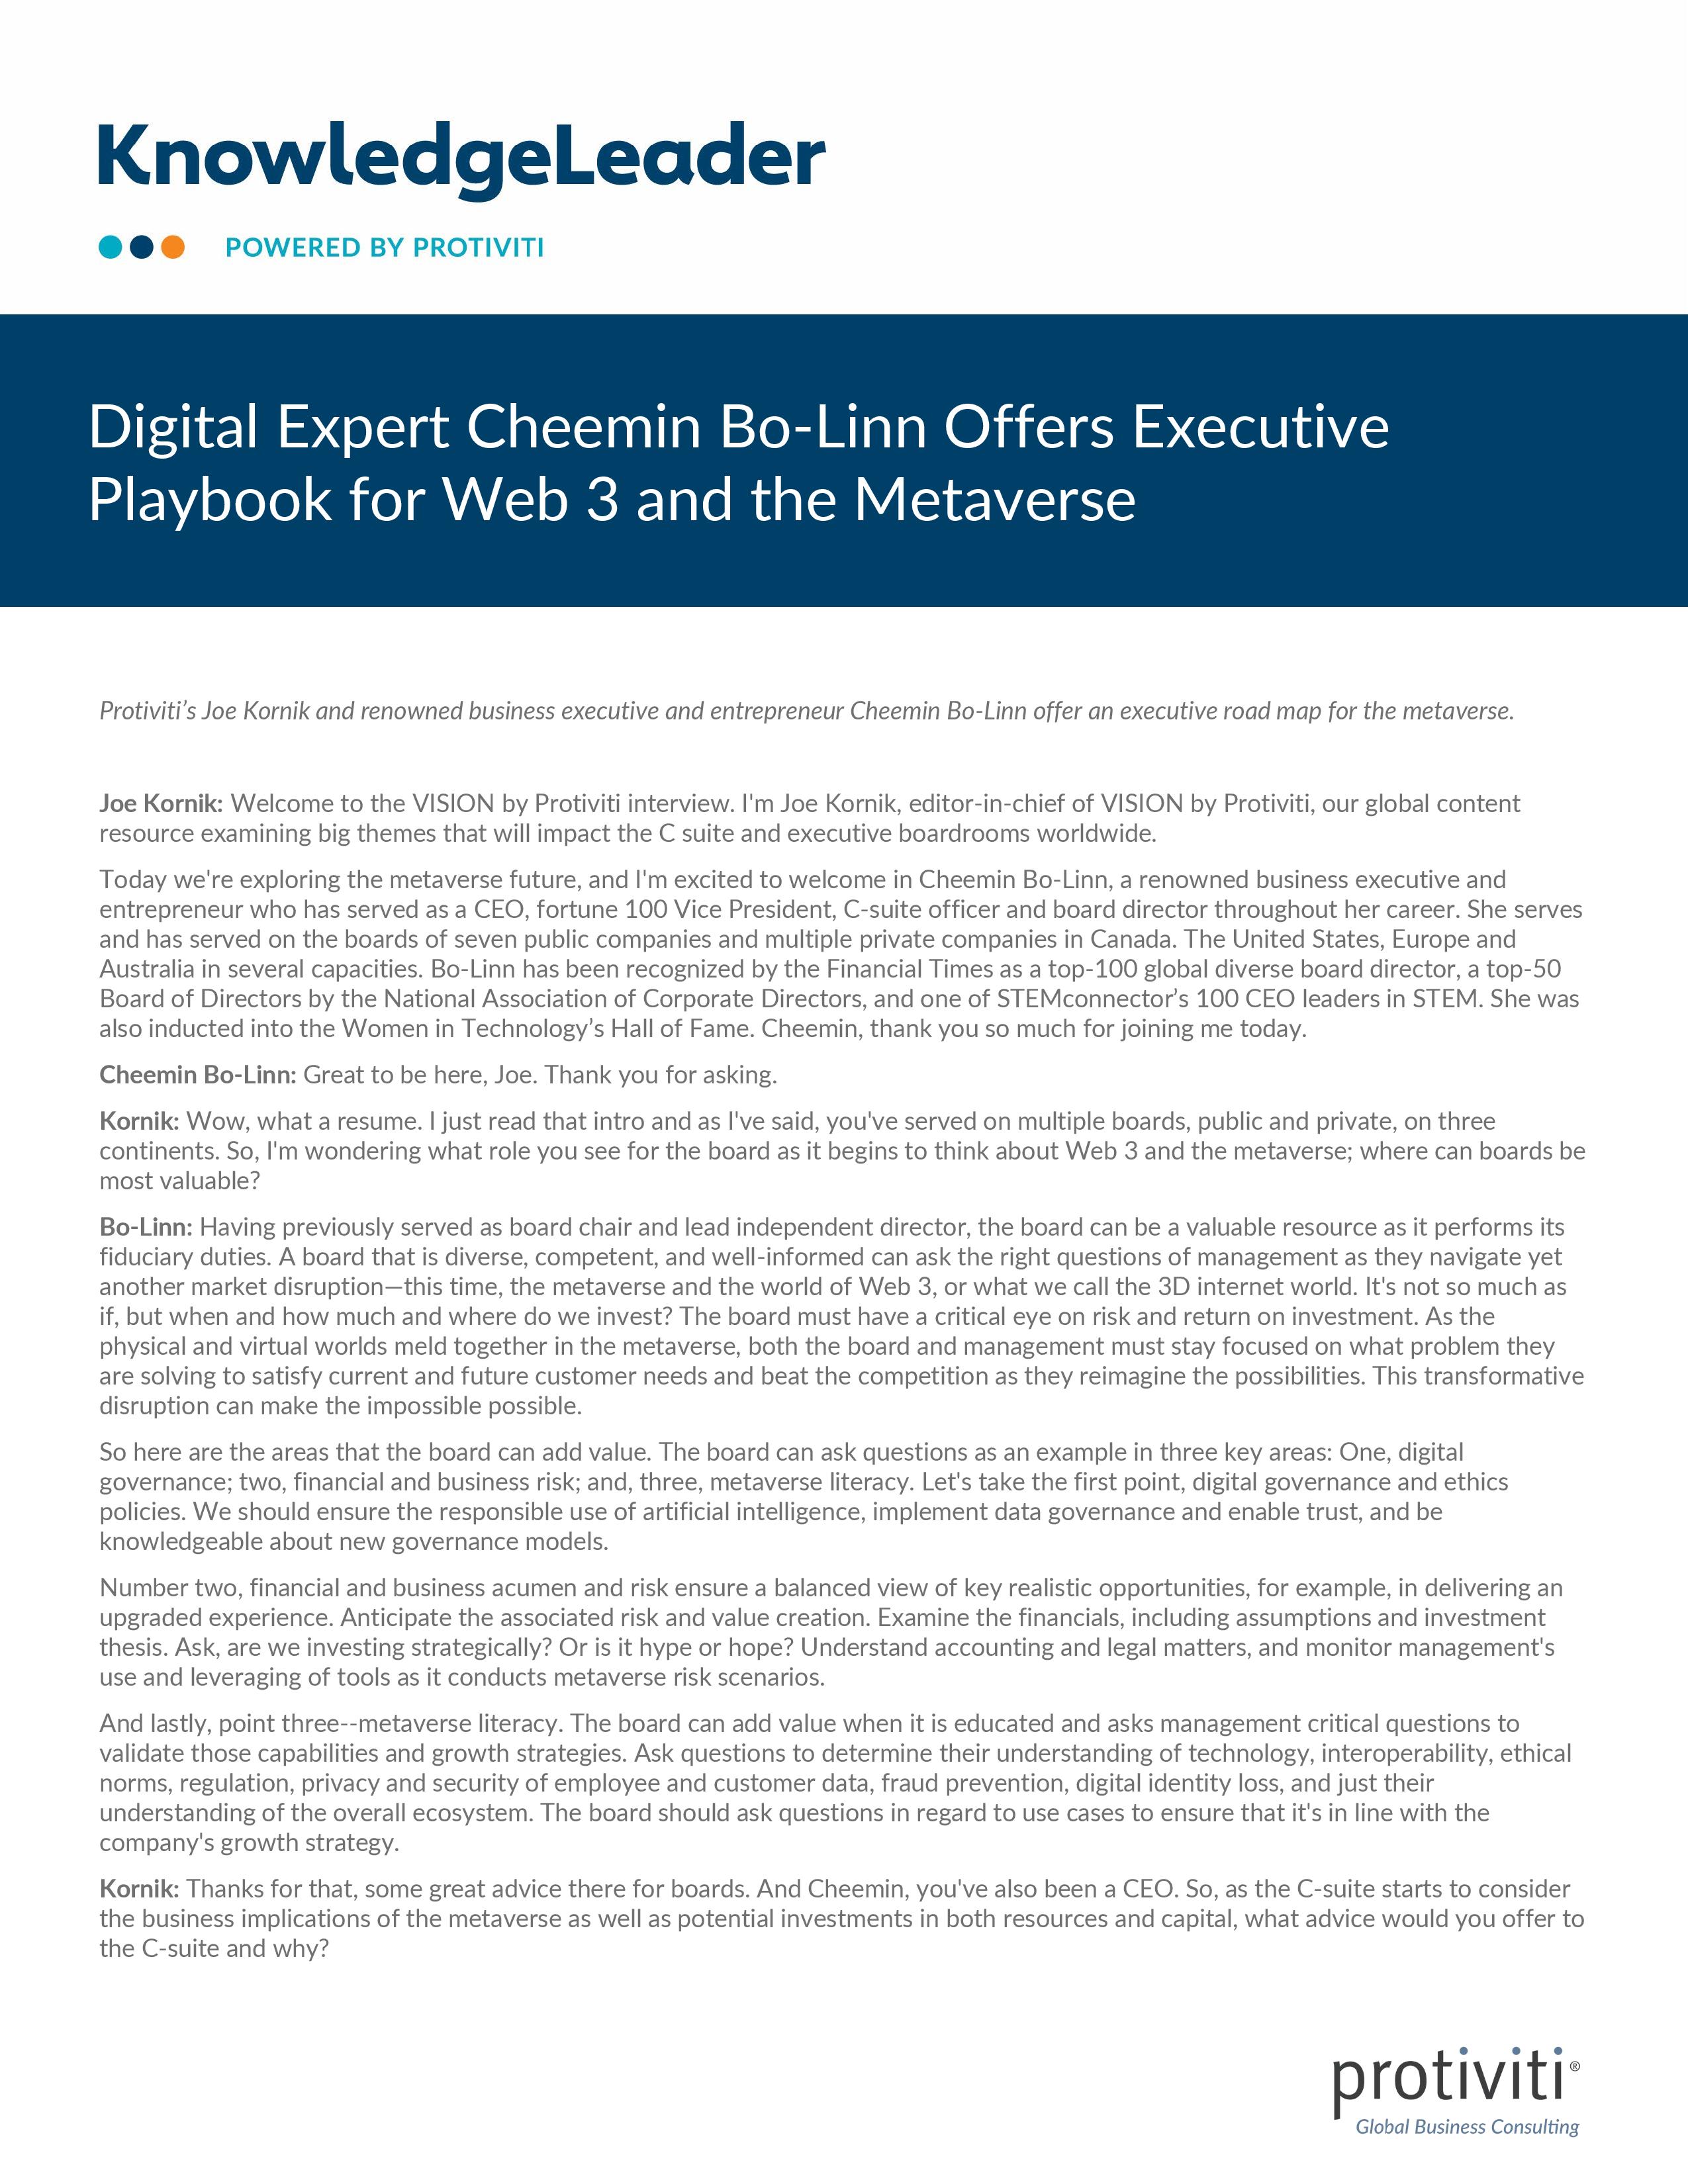 Screenshot of the first page of Digital Expert Cheemin Bo-Linn Offers Executive Playbook for Web 3 and the Metaverse